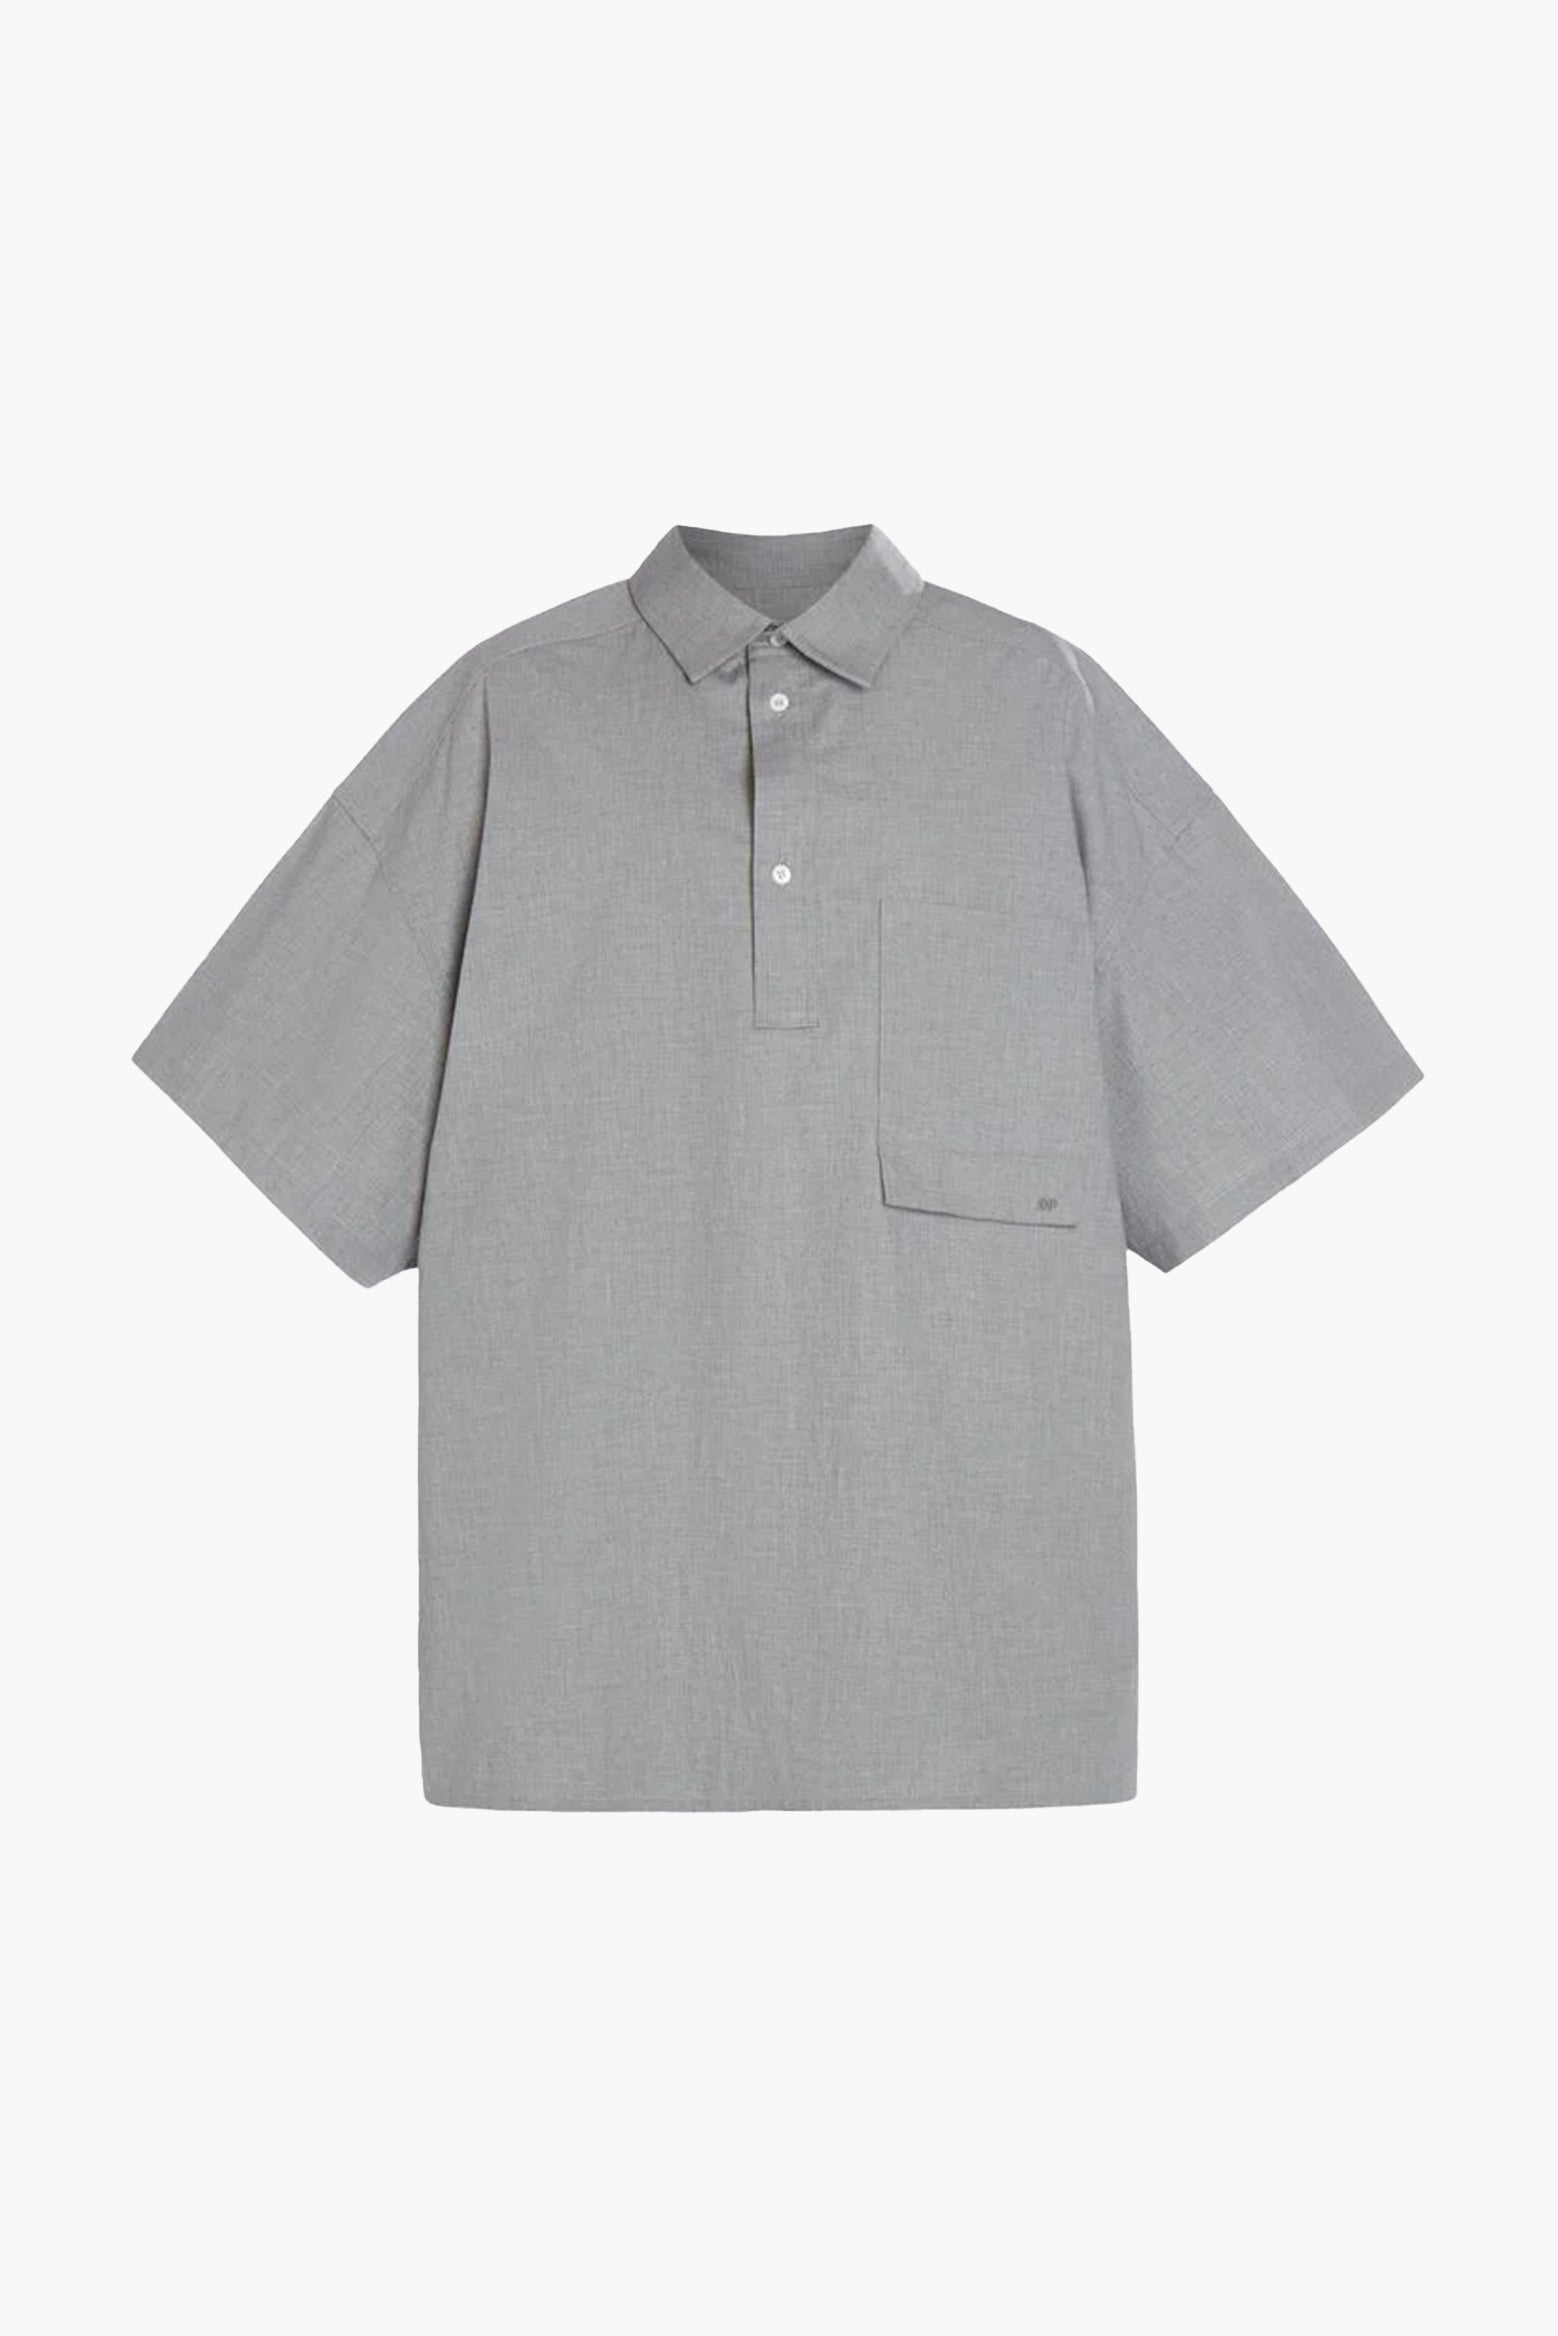 Darkpark Alec Polo in Grey Melange available at The New Trend Australia.